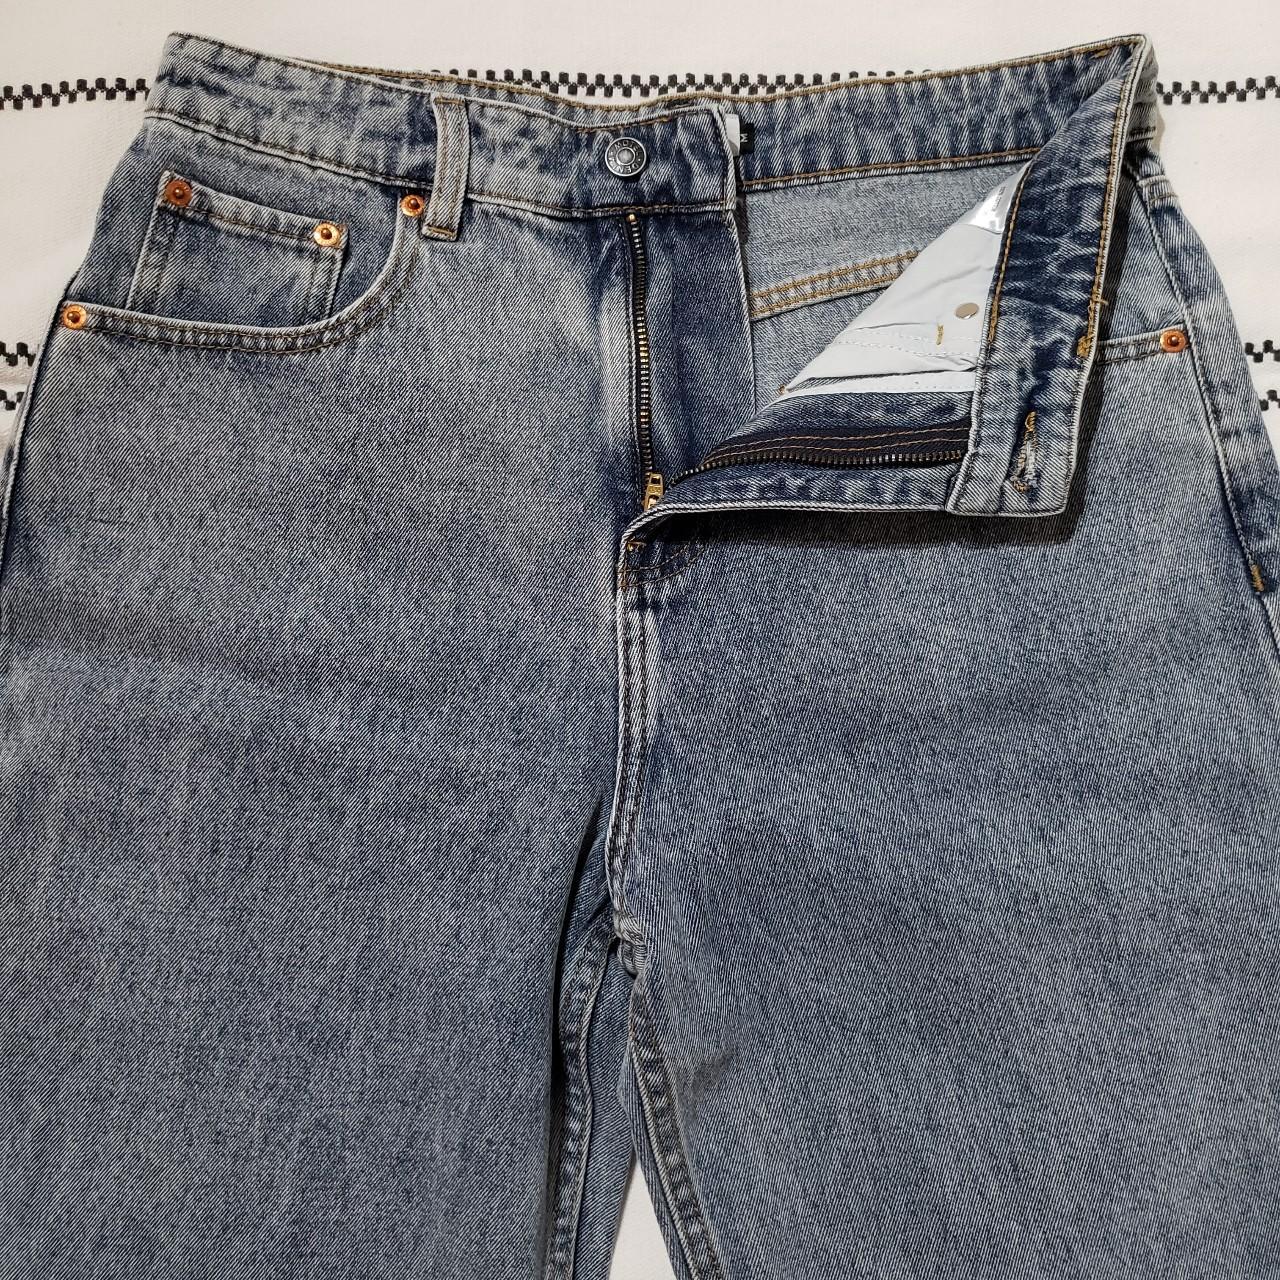 Motel wide leg jeans with raw bottom hem and 3 inch... - Depop